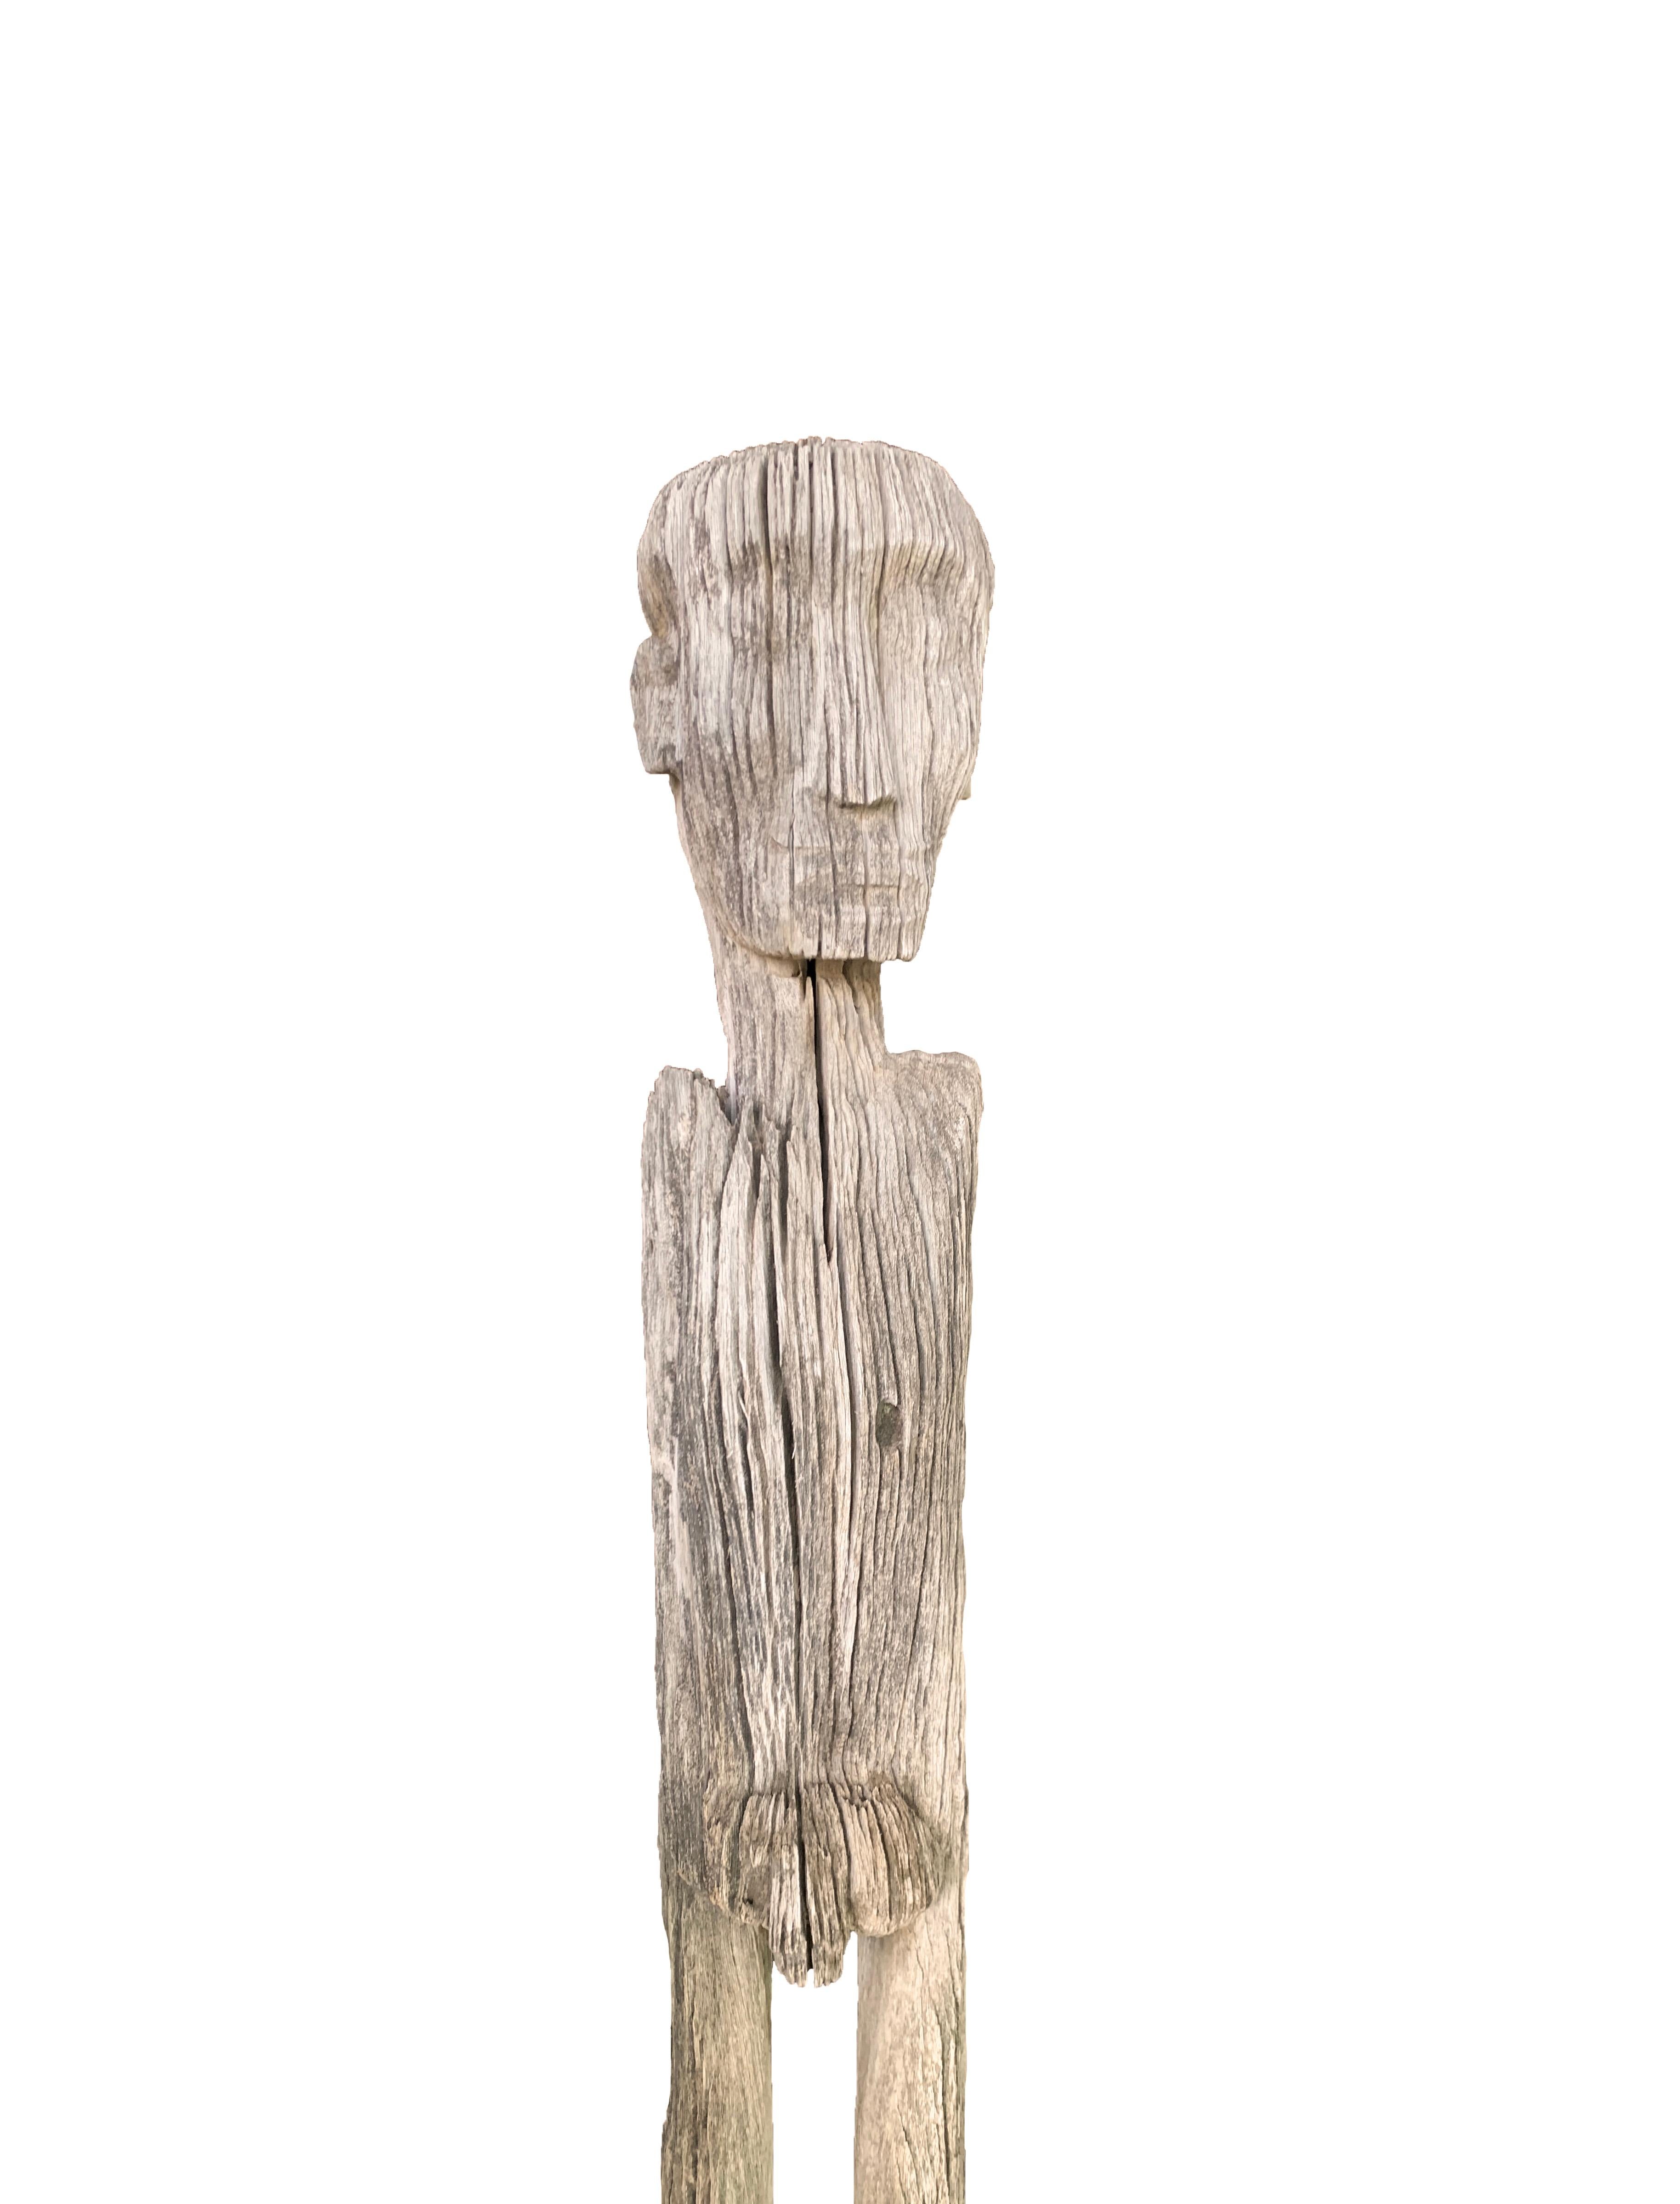 A Kalimantan carved standing sculpture of a male figure by the Dayak people from the interior rain forests of Borneo. A visibly old carving it was carved with a beautiful natural patina effect. This statue was originally used as a protective figure